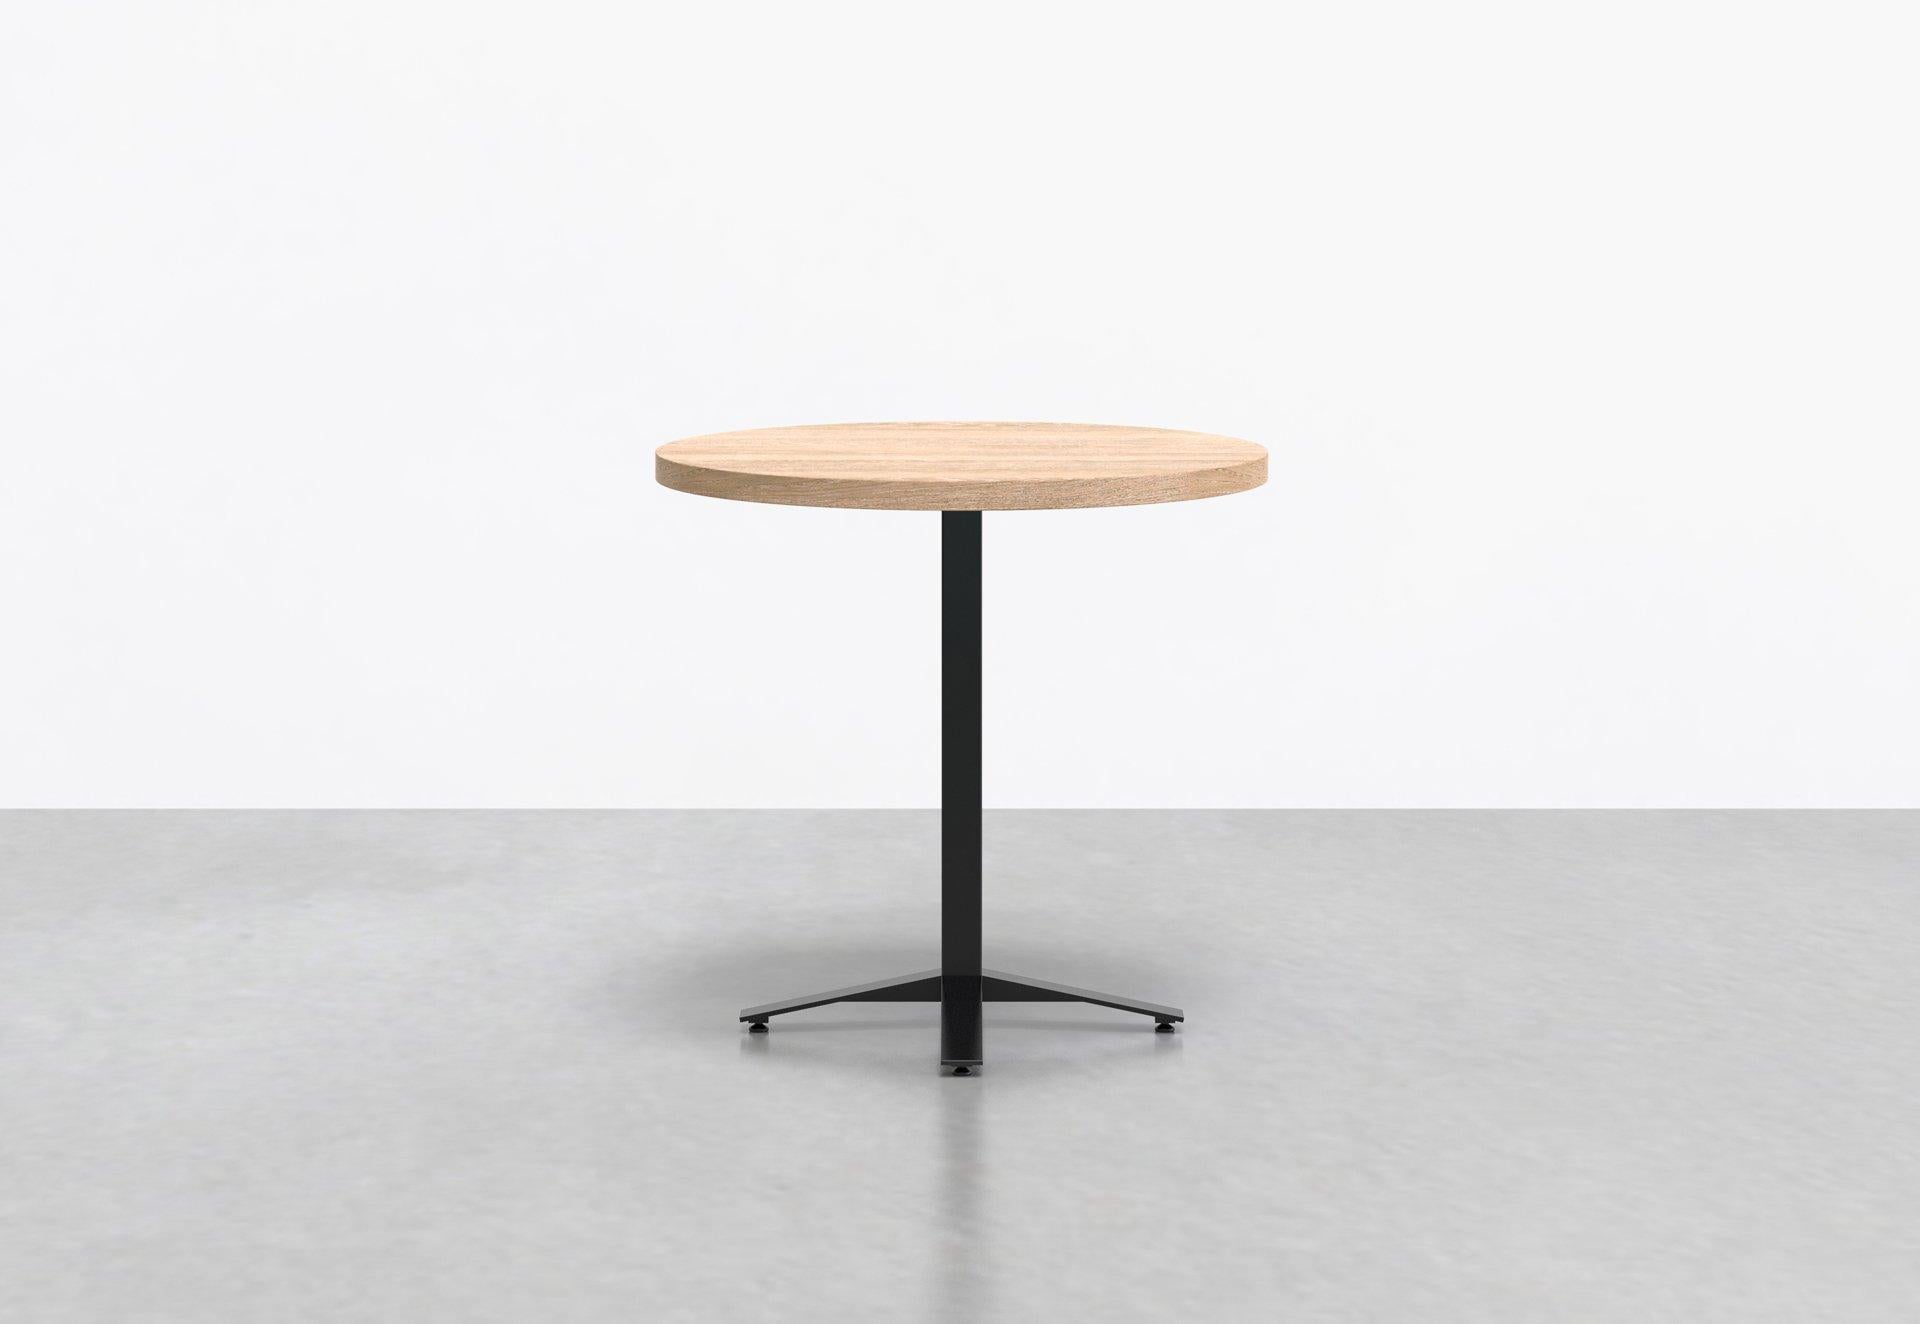 Sleek and sturdy, our Perch cafe tables are available with round or square tops, and easily fit into common and dining areas. The Perch is designed for high-traffic commercial use, and have been a favorite with many restaurant clients. Its four-foot